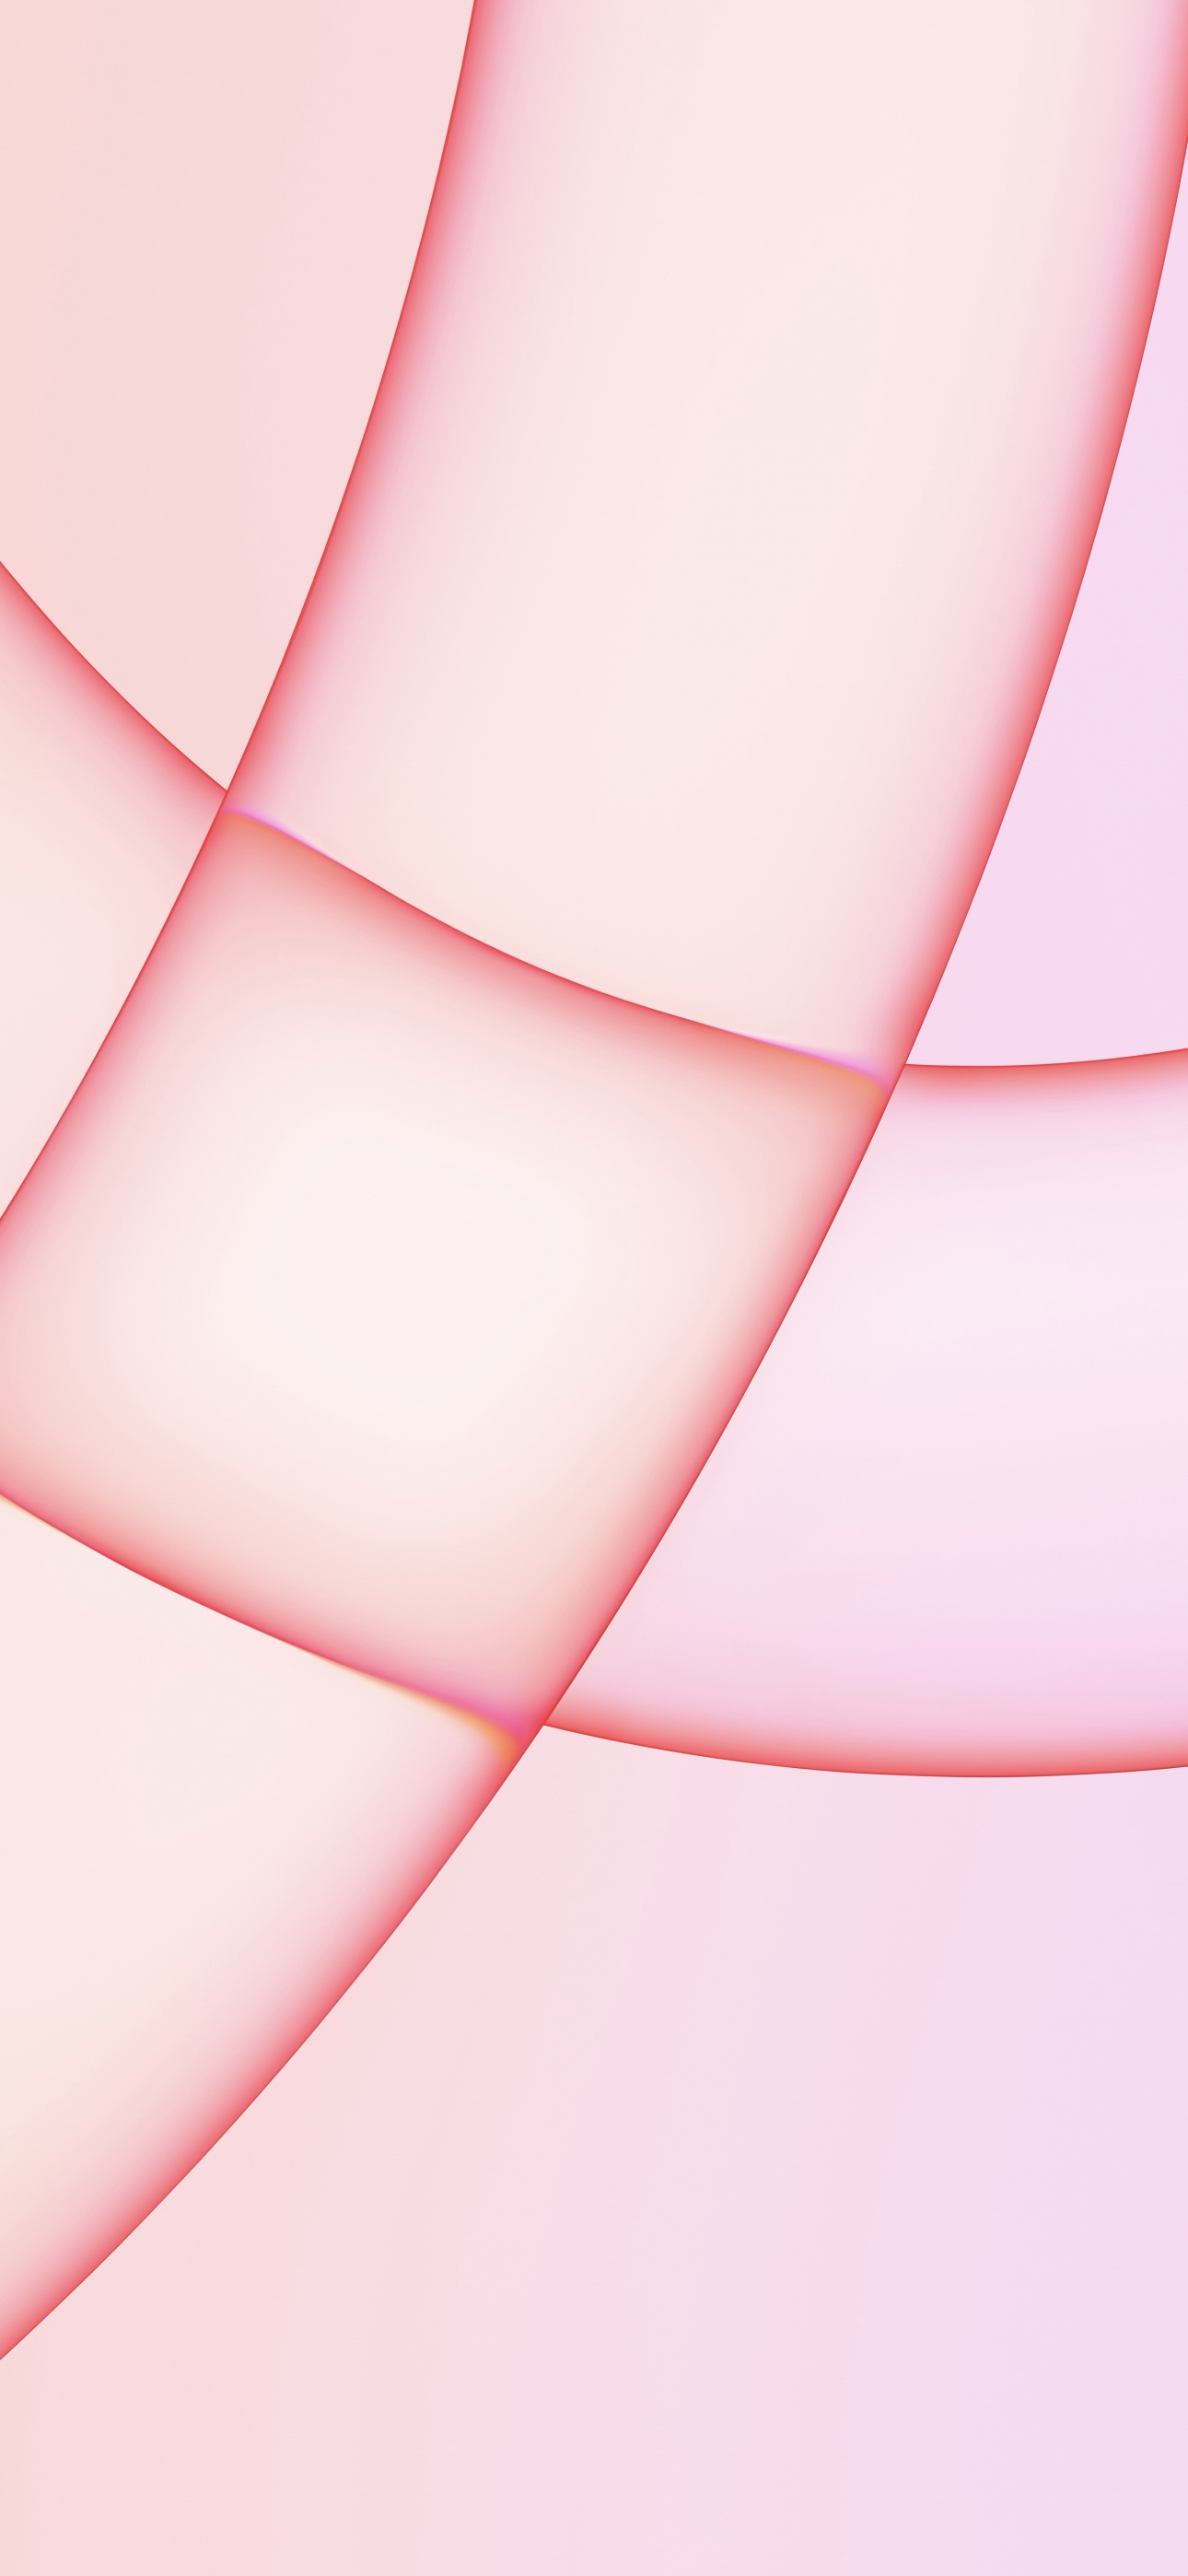 50 Stunning Pink Wallpaper Backgrounds For iPhone 